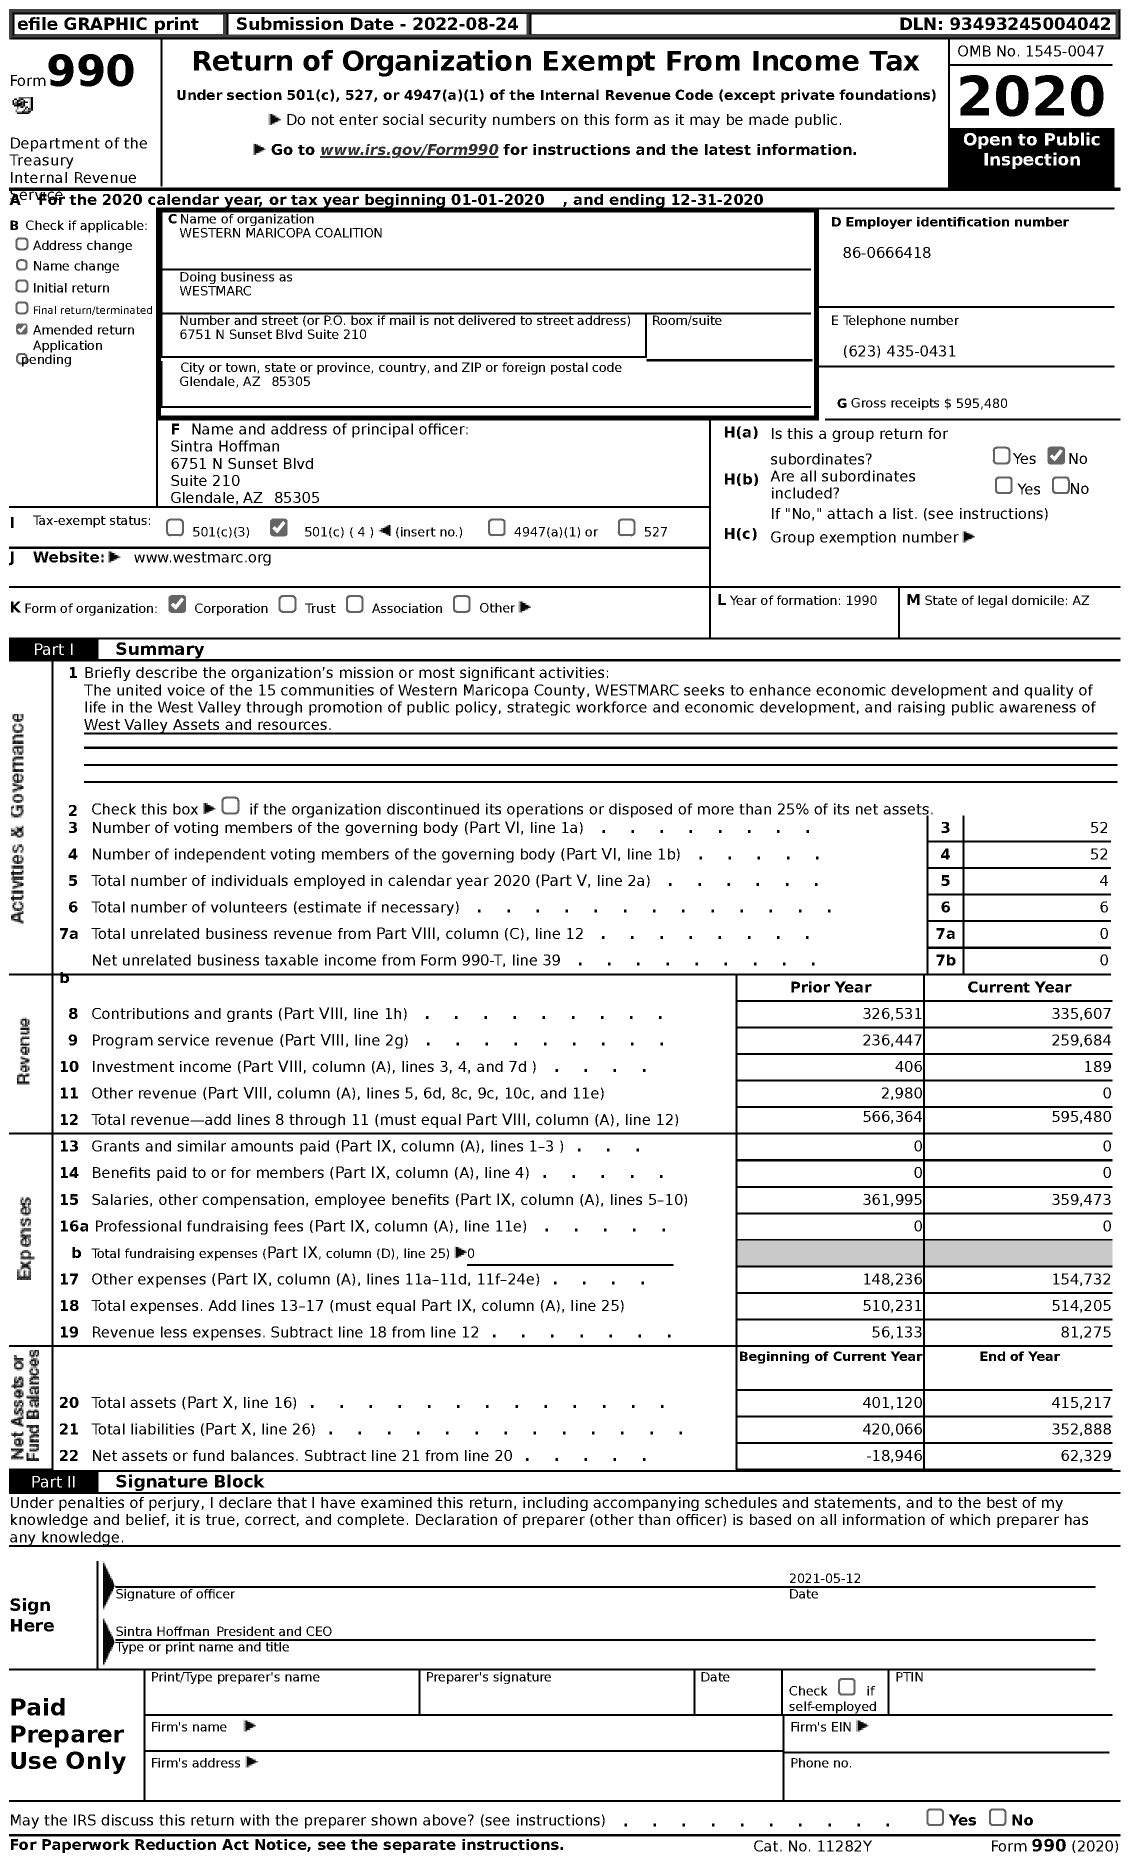 Image of first page of 2020 Form 990 for Westmarc